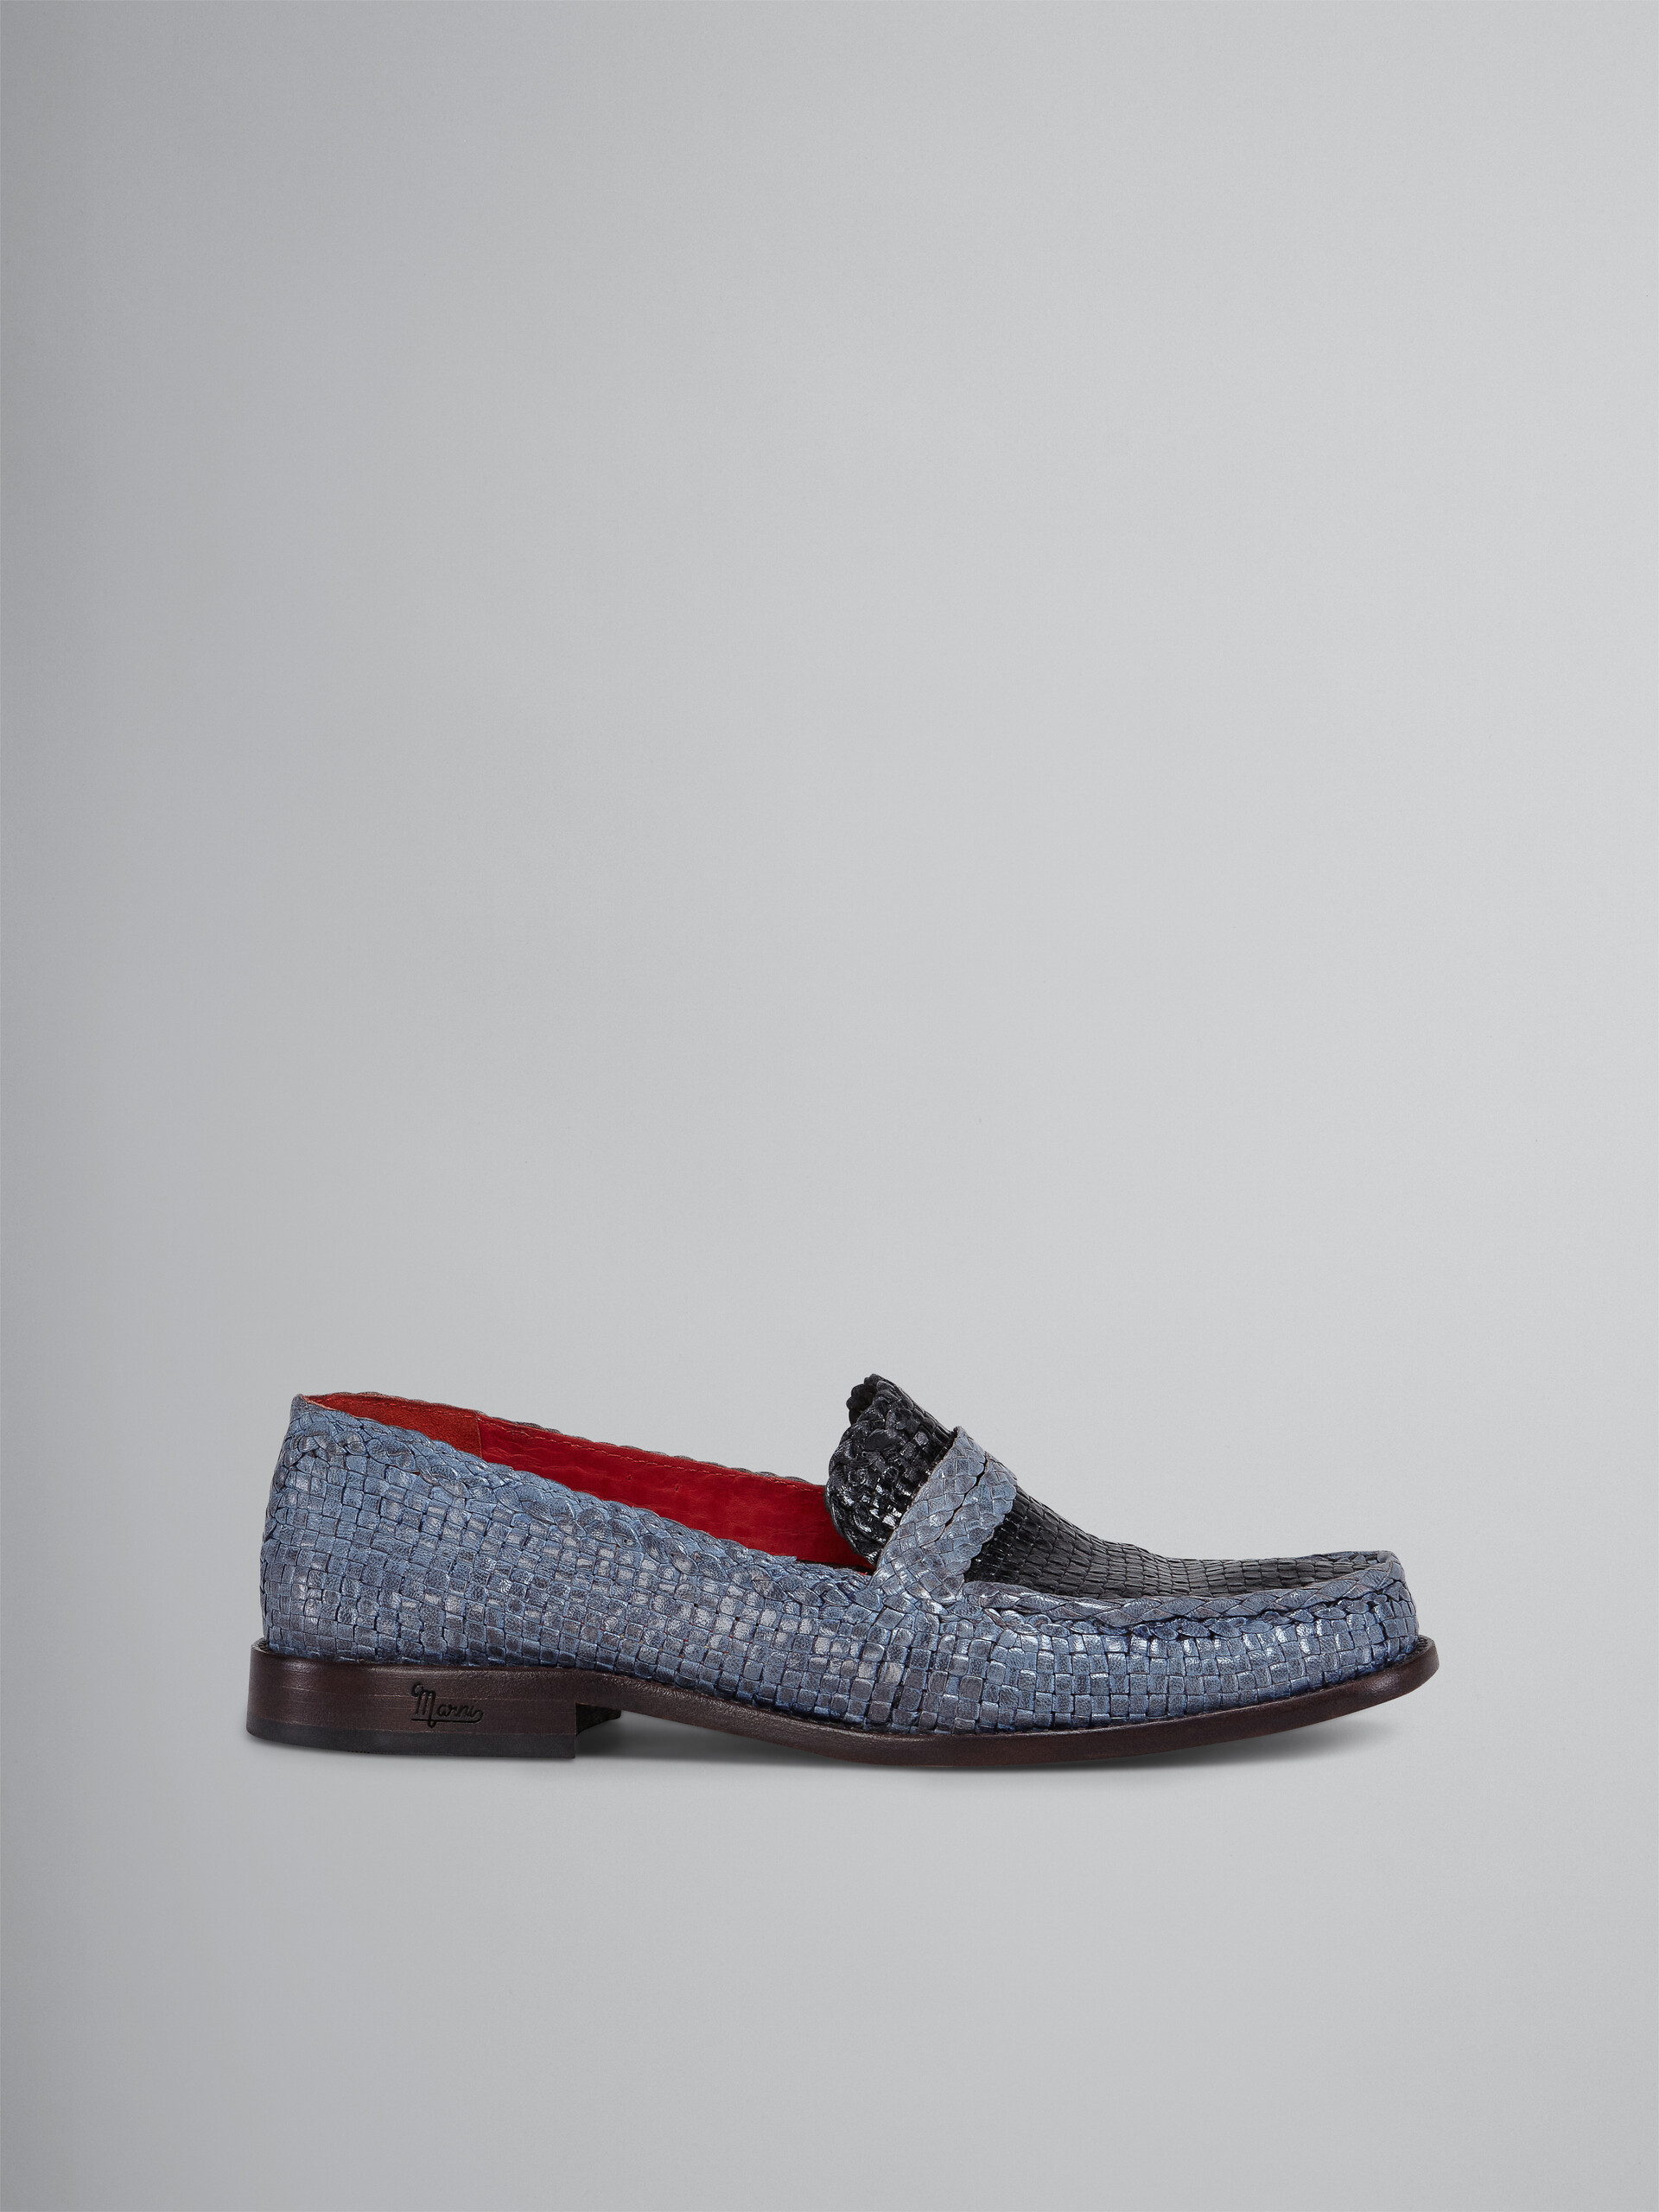 Black and blue woven leather moccasin - Mocassin - Image 1